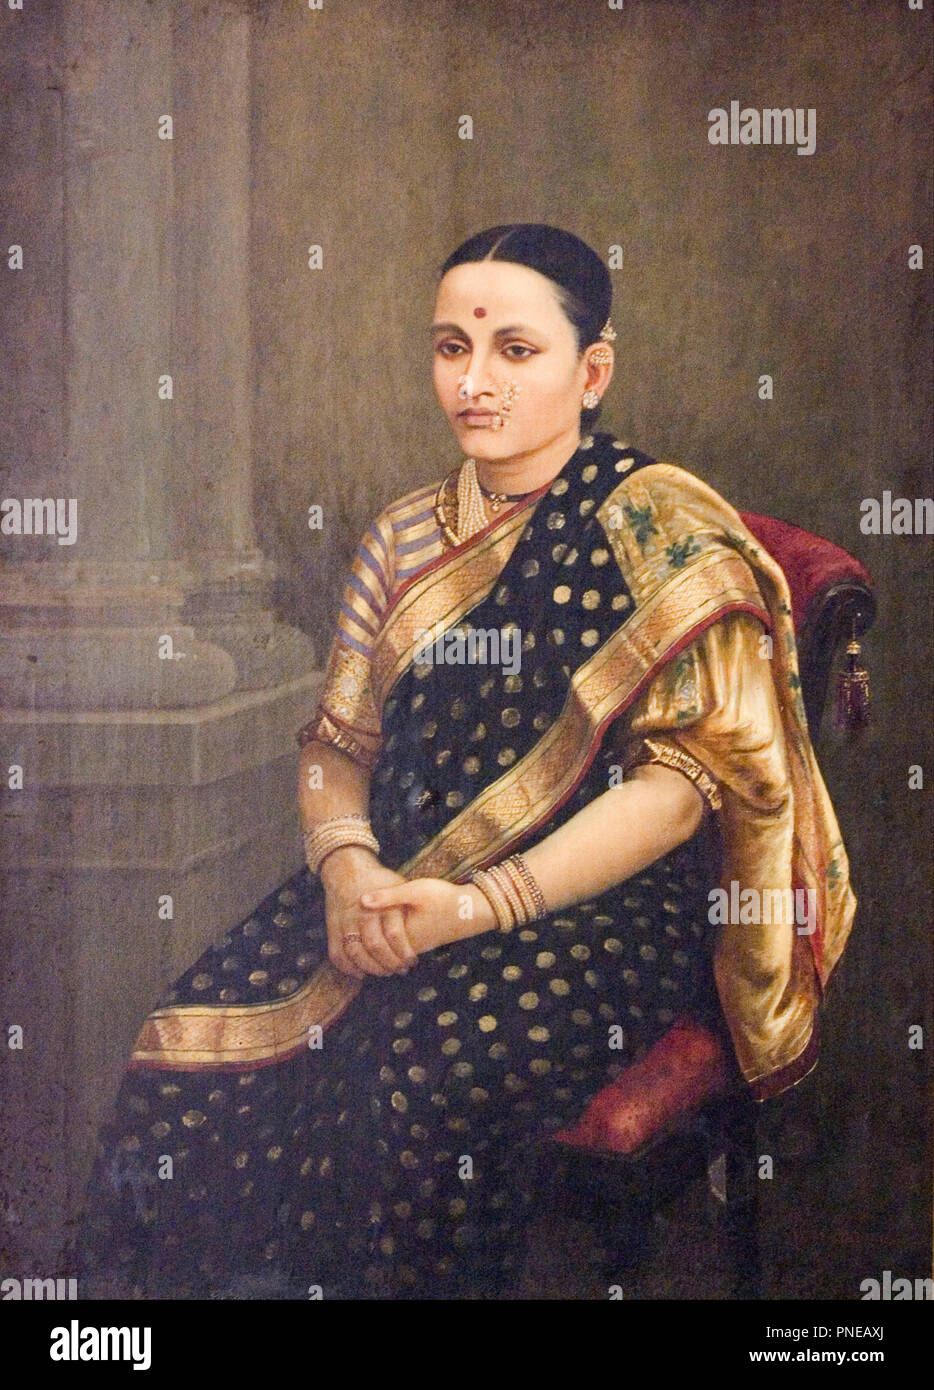 Portrait of a Lady. Date/Period: Late 19th century. Painting. Oil on canvas. Height: 1,200 mm (47.24 in); Width: 863 mm (33.97 in). Author: RAJA RAVI VARMA. Stock Photo